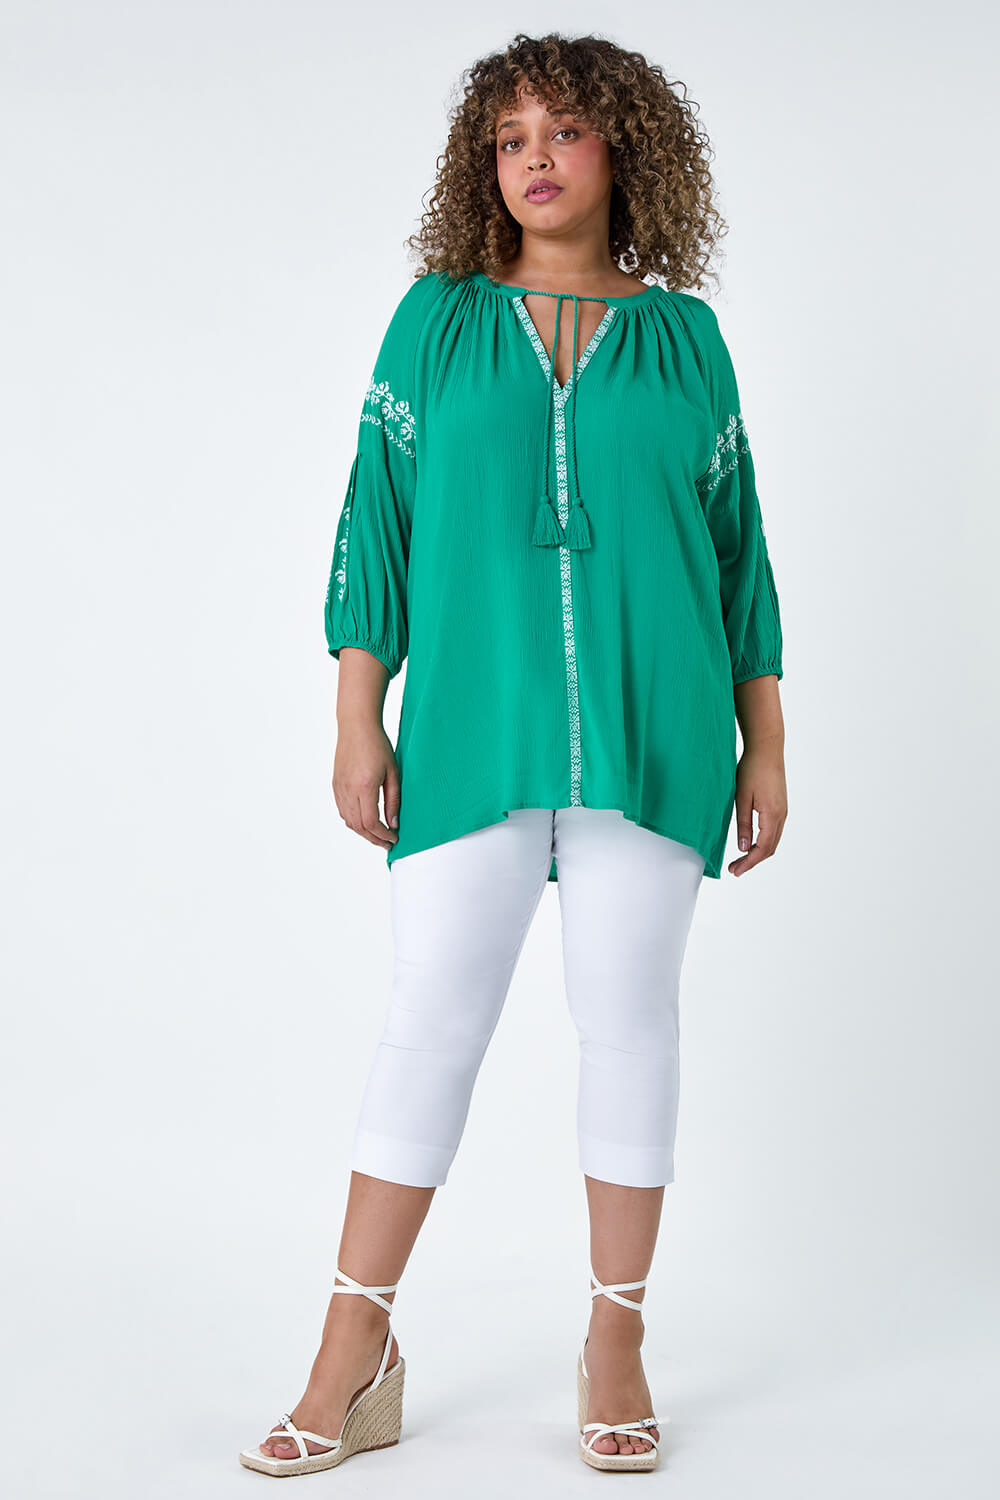 Turquoise Curve Tie Neck Embroidered Smock Top, Image 2 of 5